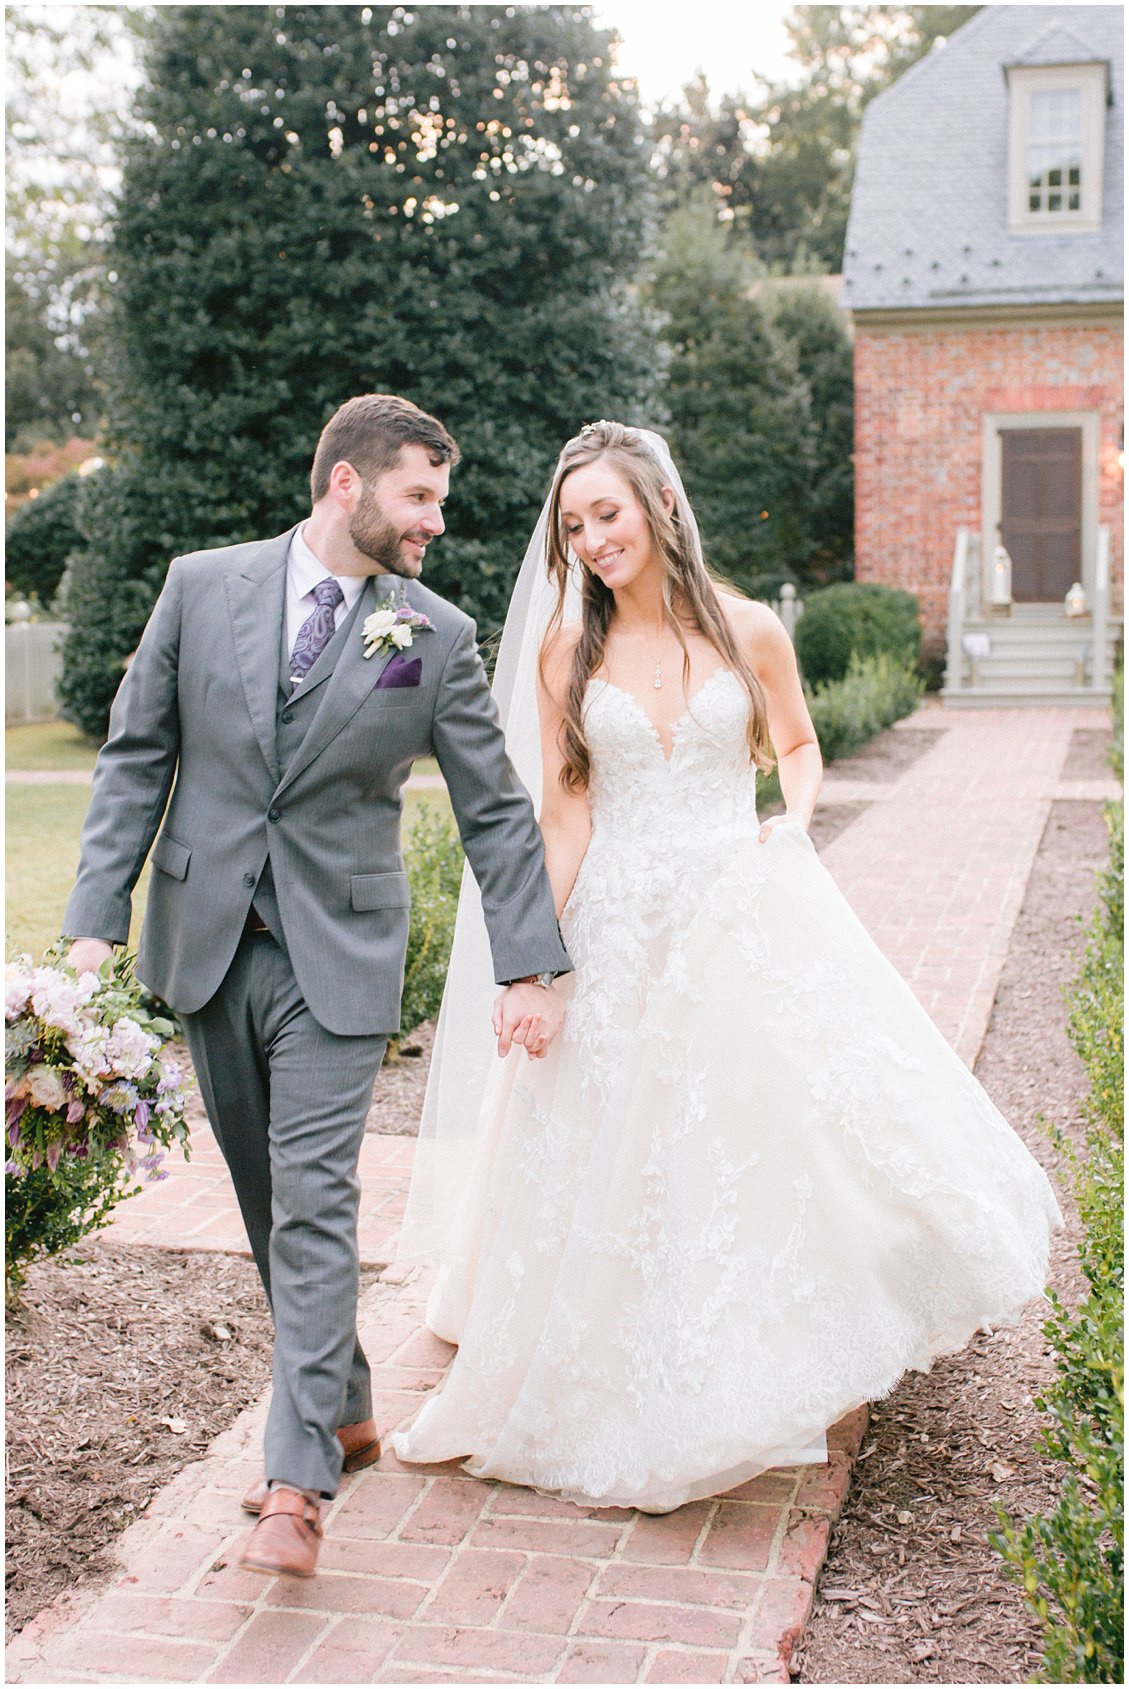 Romantic fall outdoor wedding at Seven Springs Farm & Manor captured by Tara & Stephen of Pattengale Photography